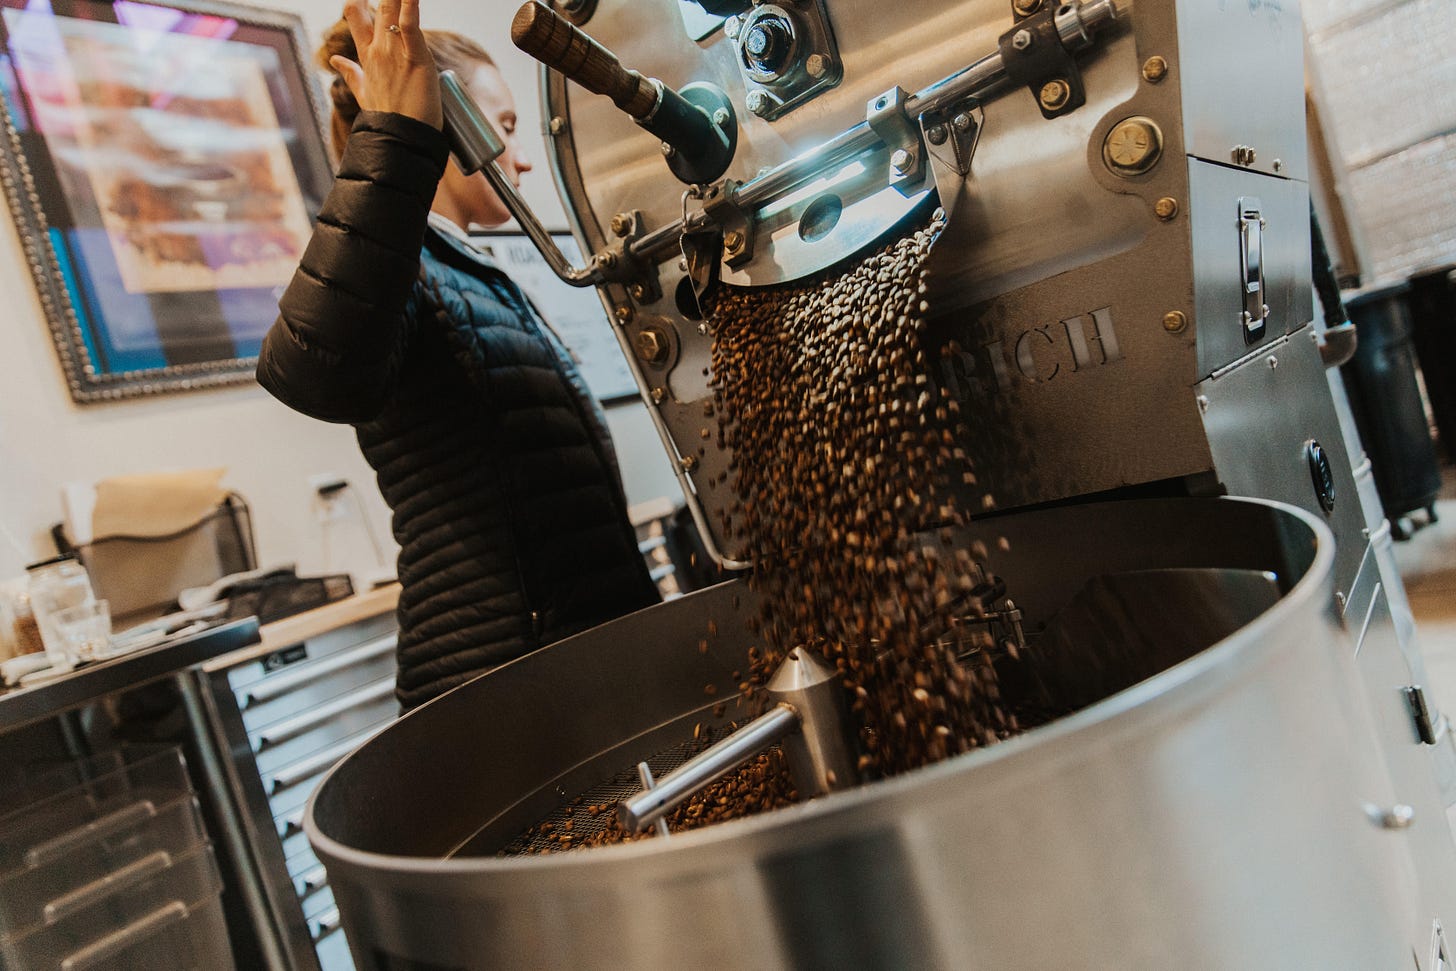 Breanna Briggs, head roaster of Leap Coffee shifting a release lever and opening a hatch on a coffee roaster allowing the coffee beans to flow out into a stainless steel barrel.